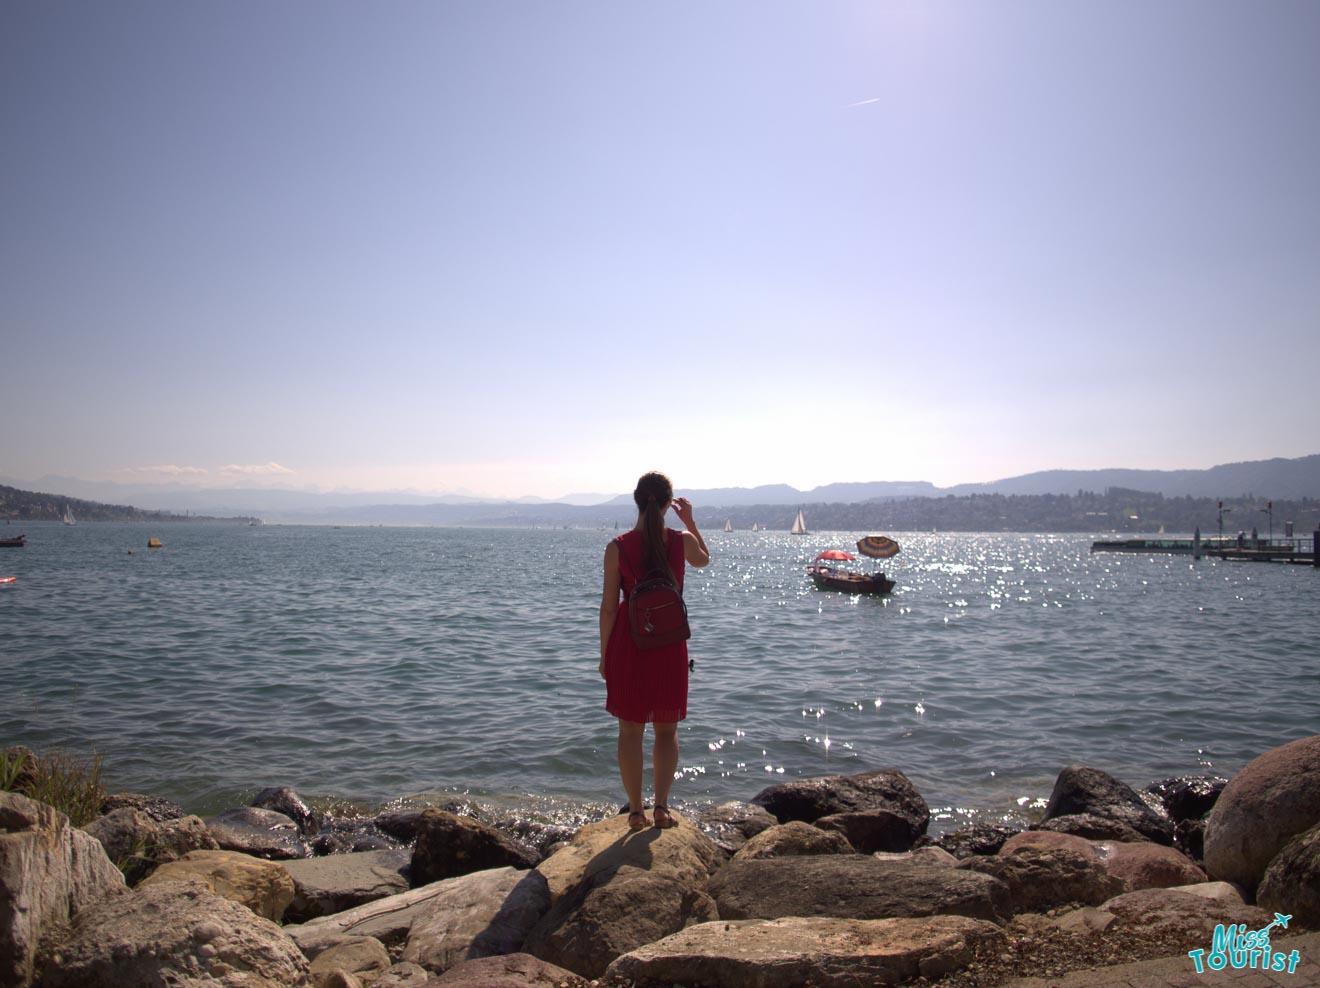 A lone individual with a red backpack stands on the rocky shore of Lake Zurich, gazing out at the shimmering water and distant sailing boats under a hazy sky.